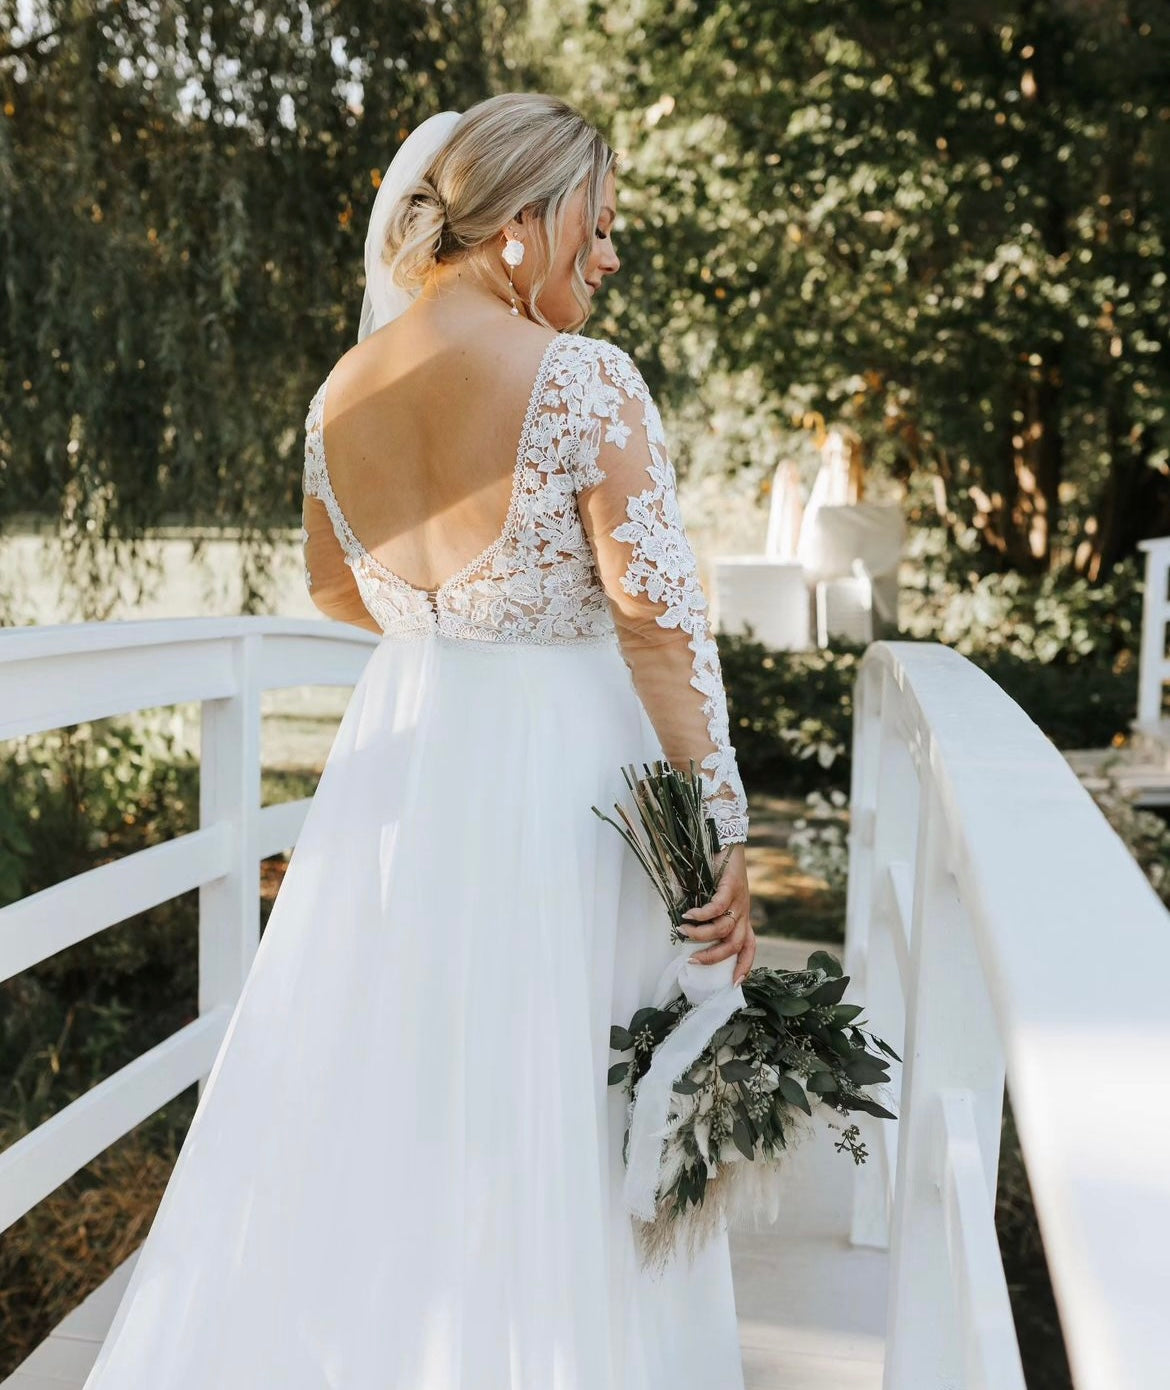 Decker - boho wedding dress with long sleeves and open V back, chiffon skirt with lace train